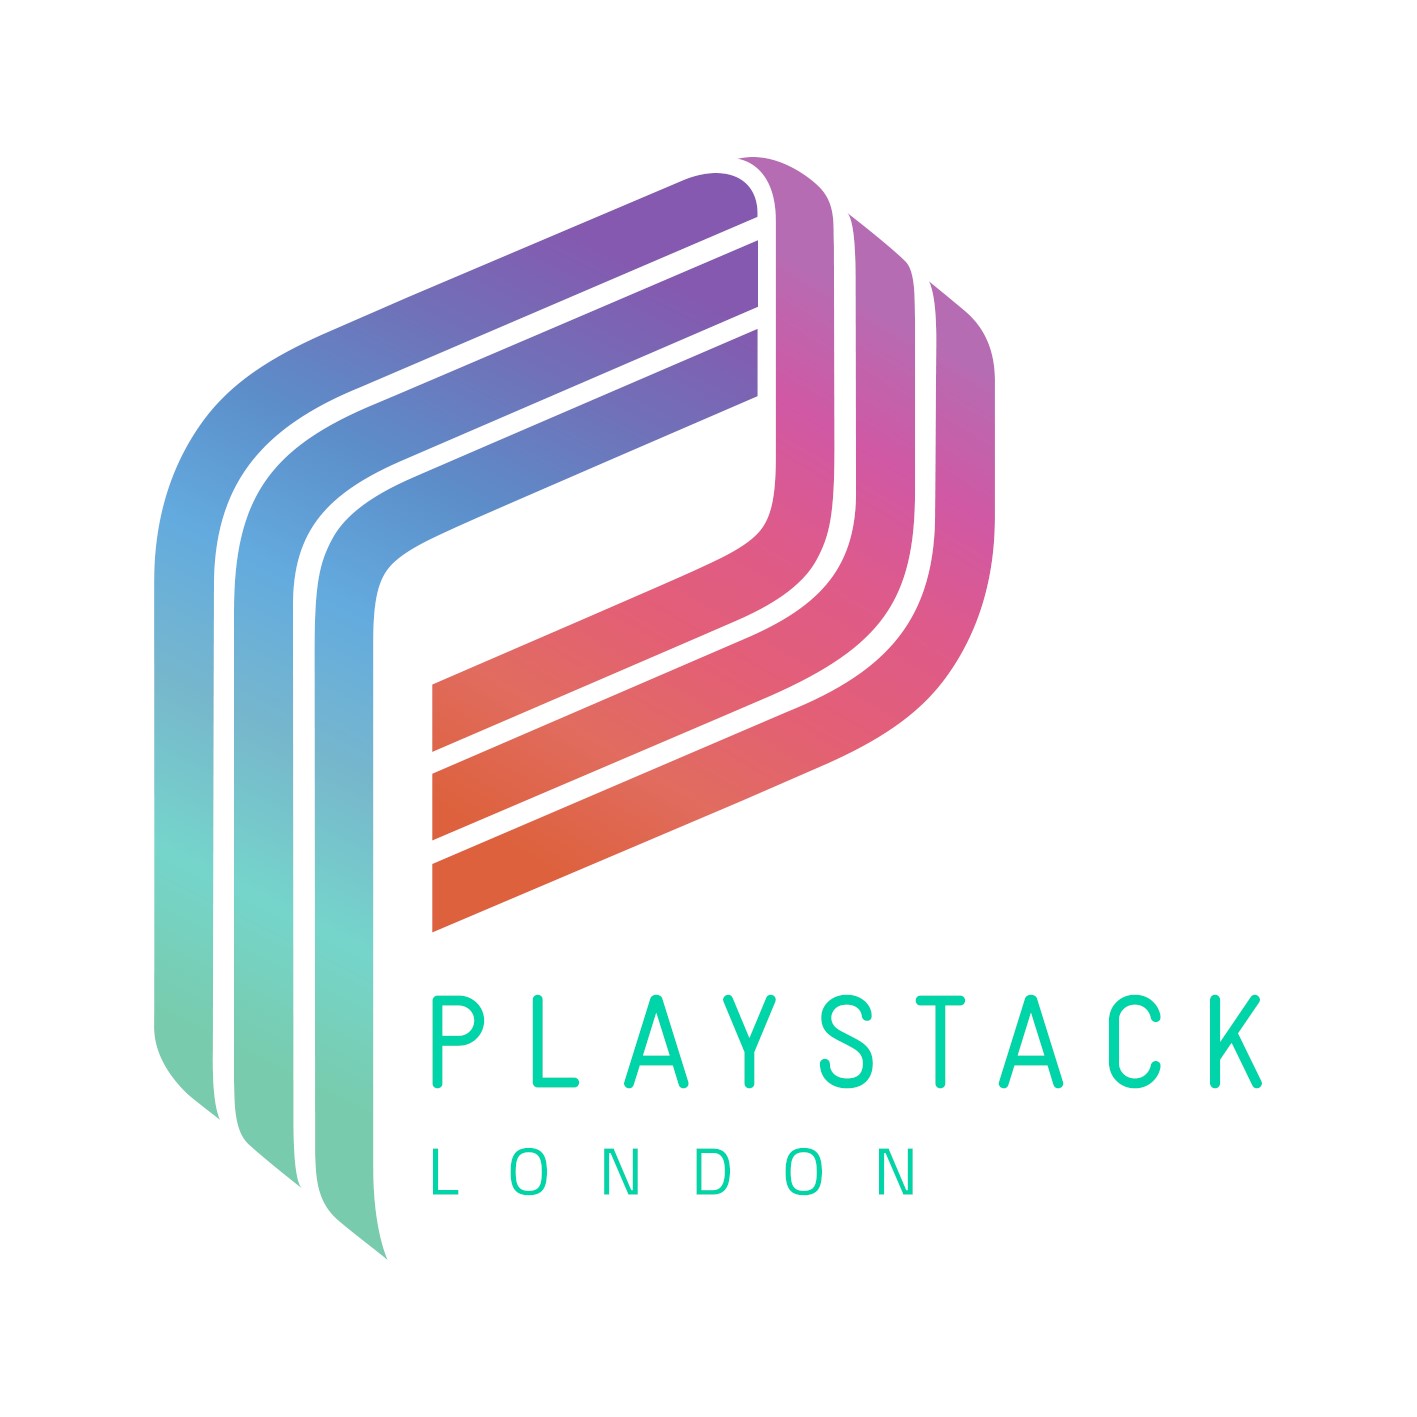 Playstack releases the first city-building simulation game on Apple Arcade - Cityscapes: Sim Builder